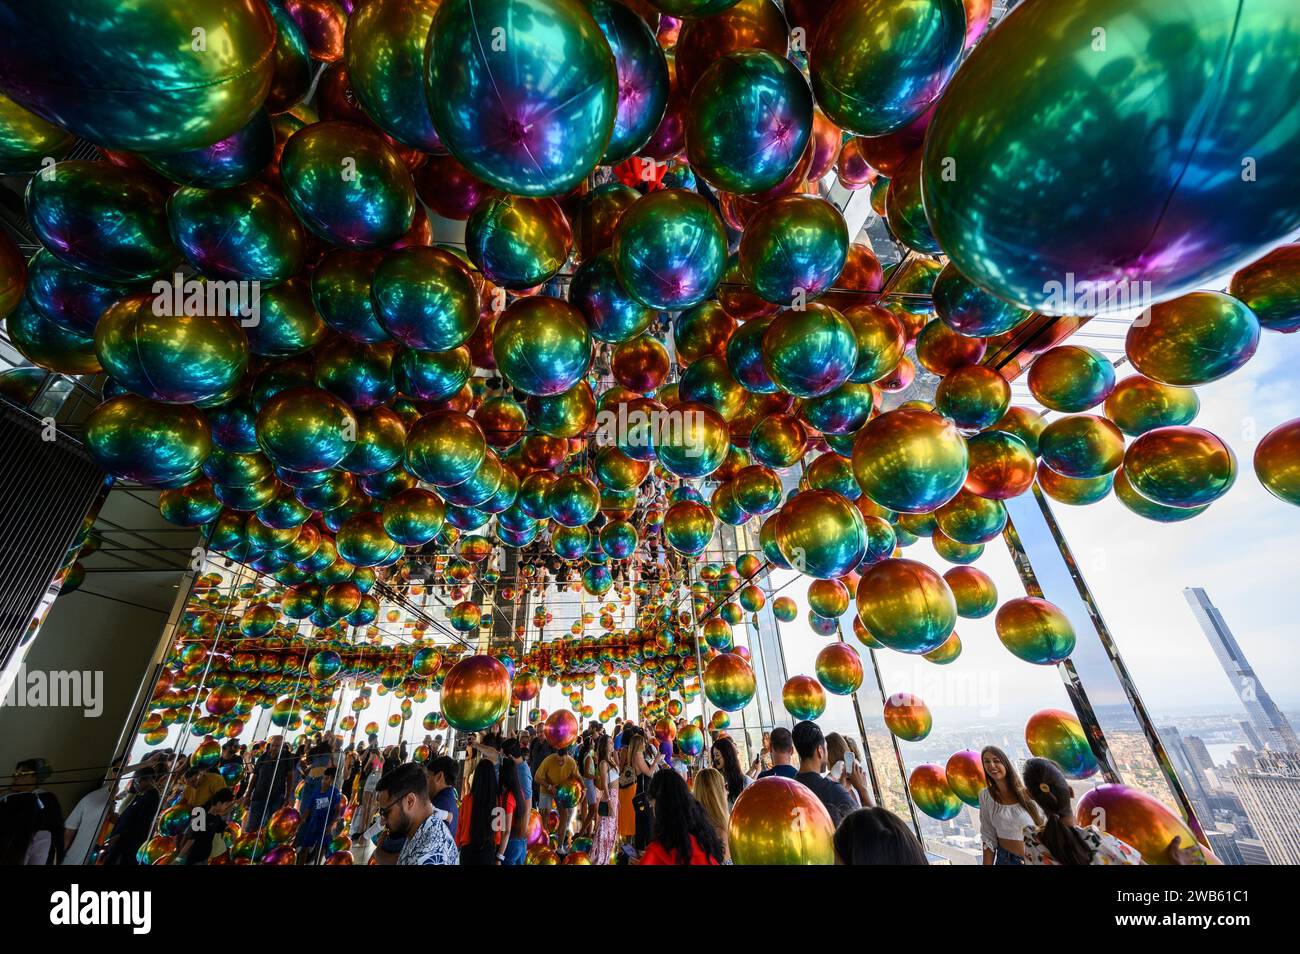 People playing and enjoying the colorful Pride Day balloons at the Summit One Vanderbilt observation deck in New York, U.S., in June 2022. Stock Photo